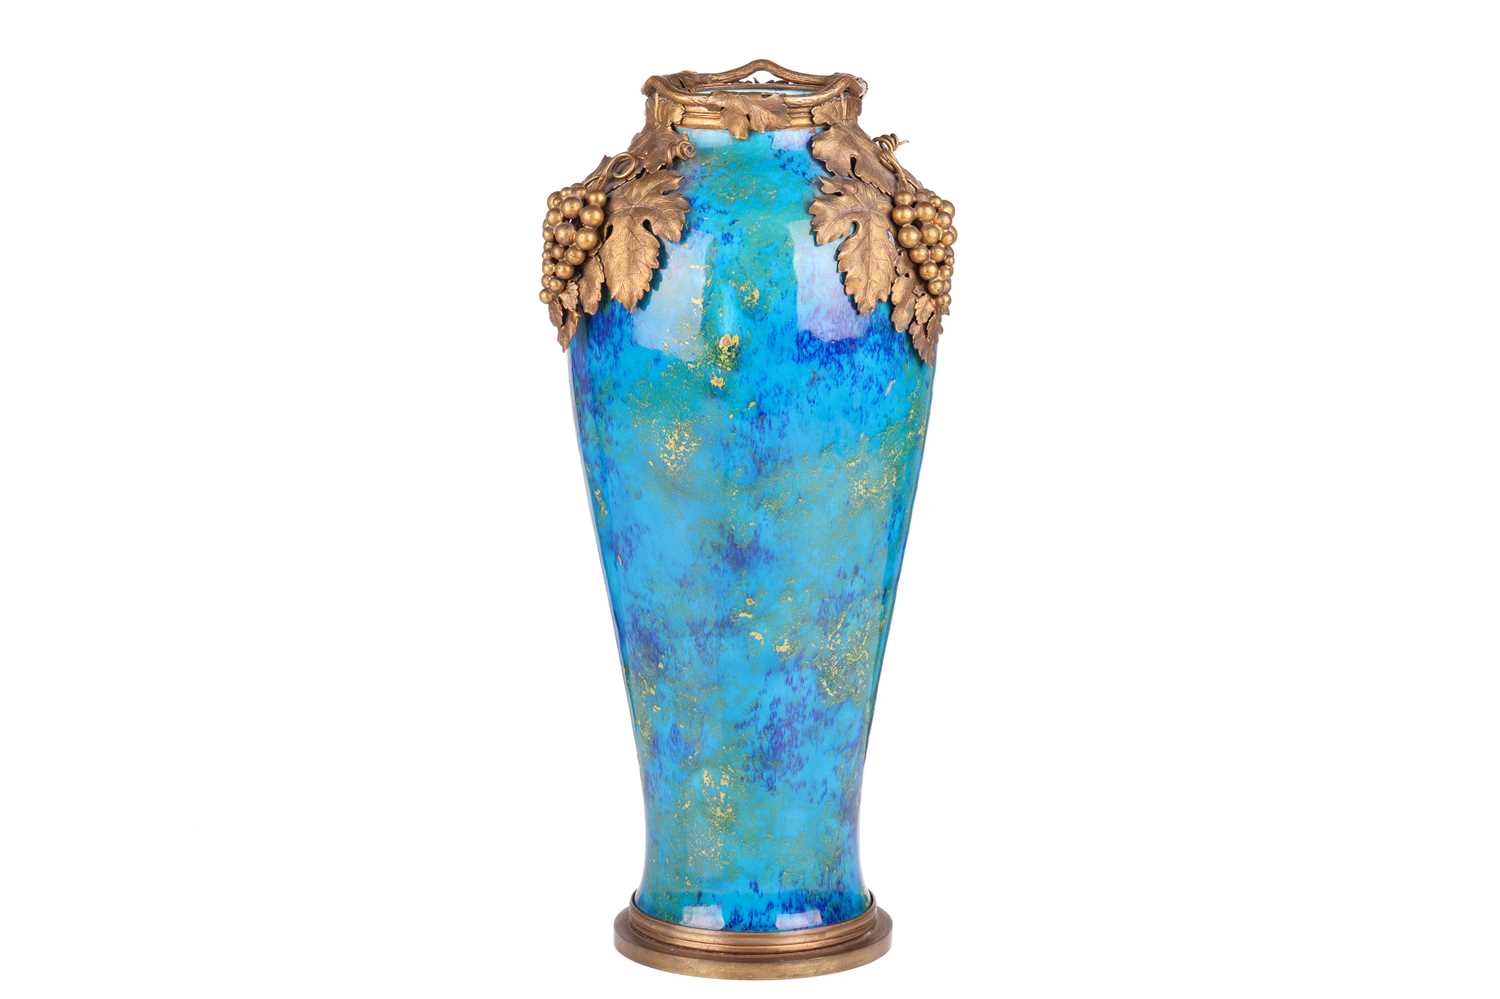 Paul Milet for Sevres, an early 20th-century tall ormolu mounted vase, with applied grape and fine - Image 3 of 5